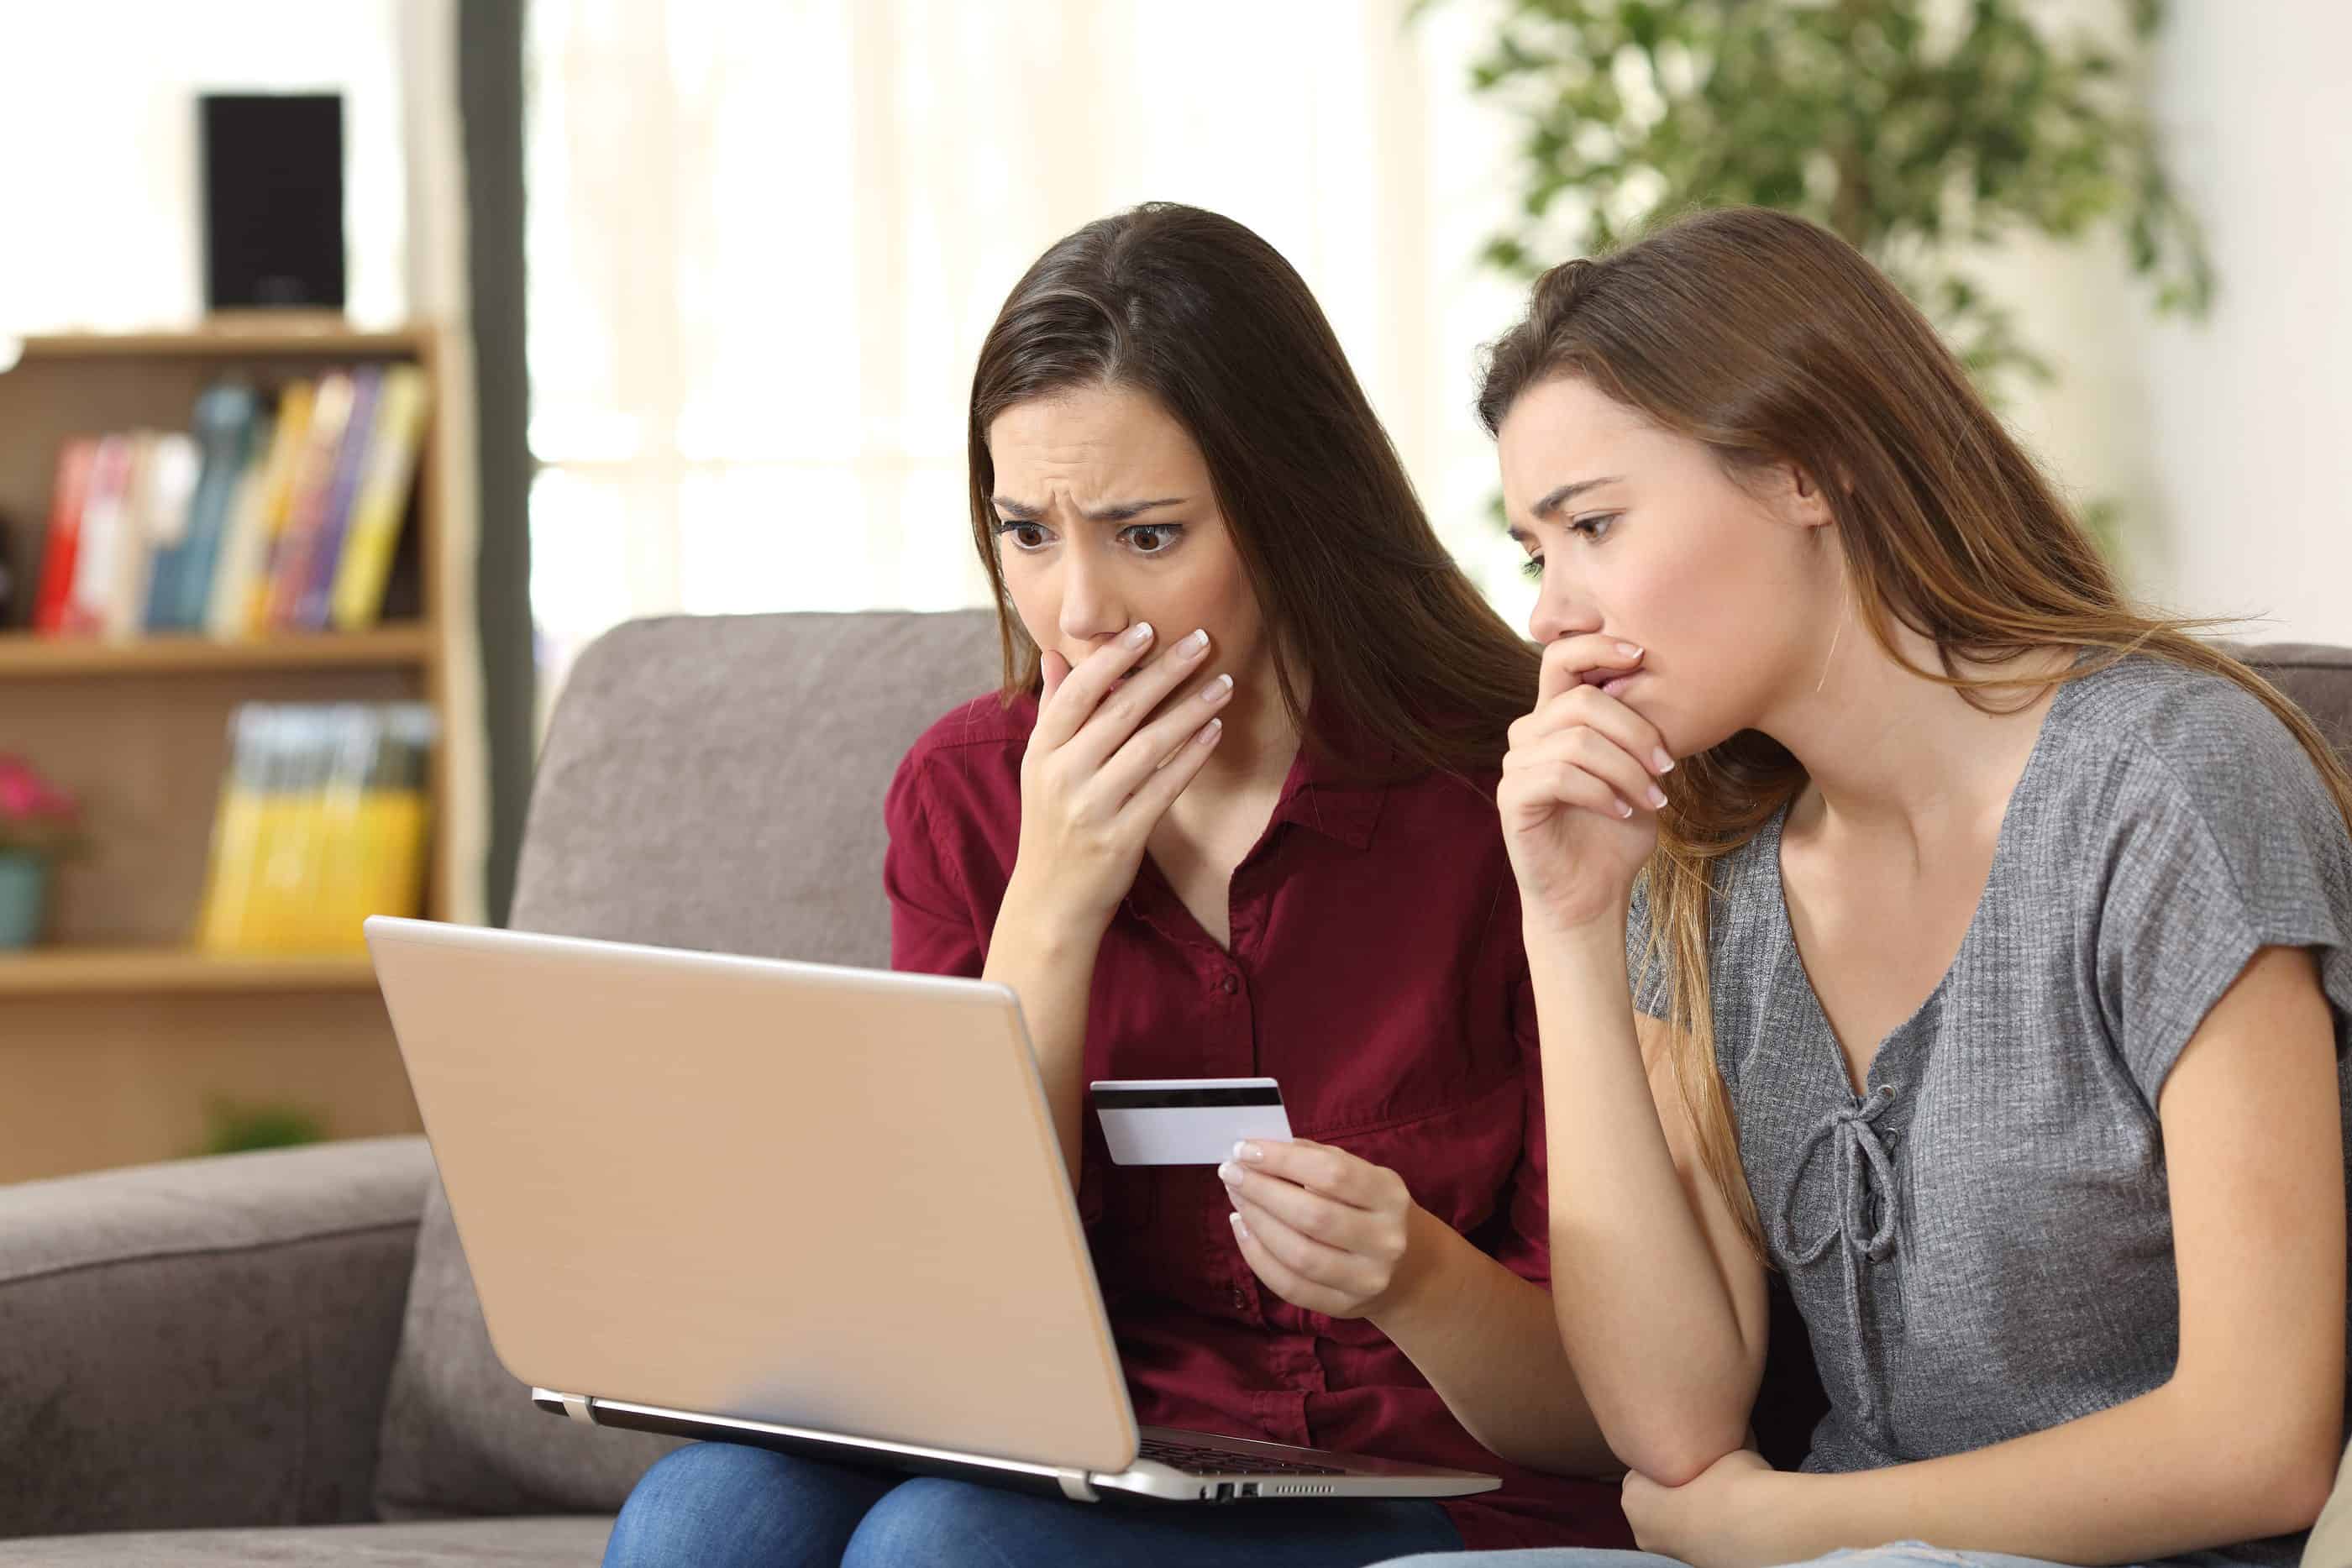 Two worried friends having problems buying on line with credit card and a laptop sitting on a couch in the living room at home